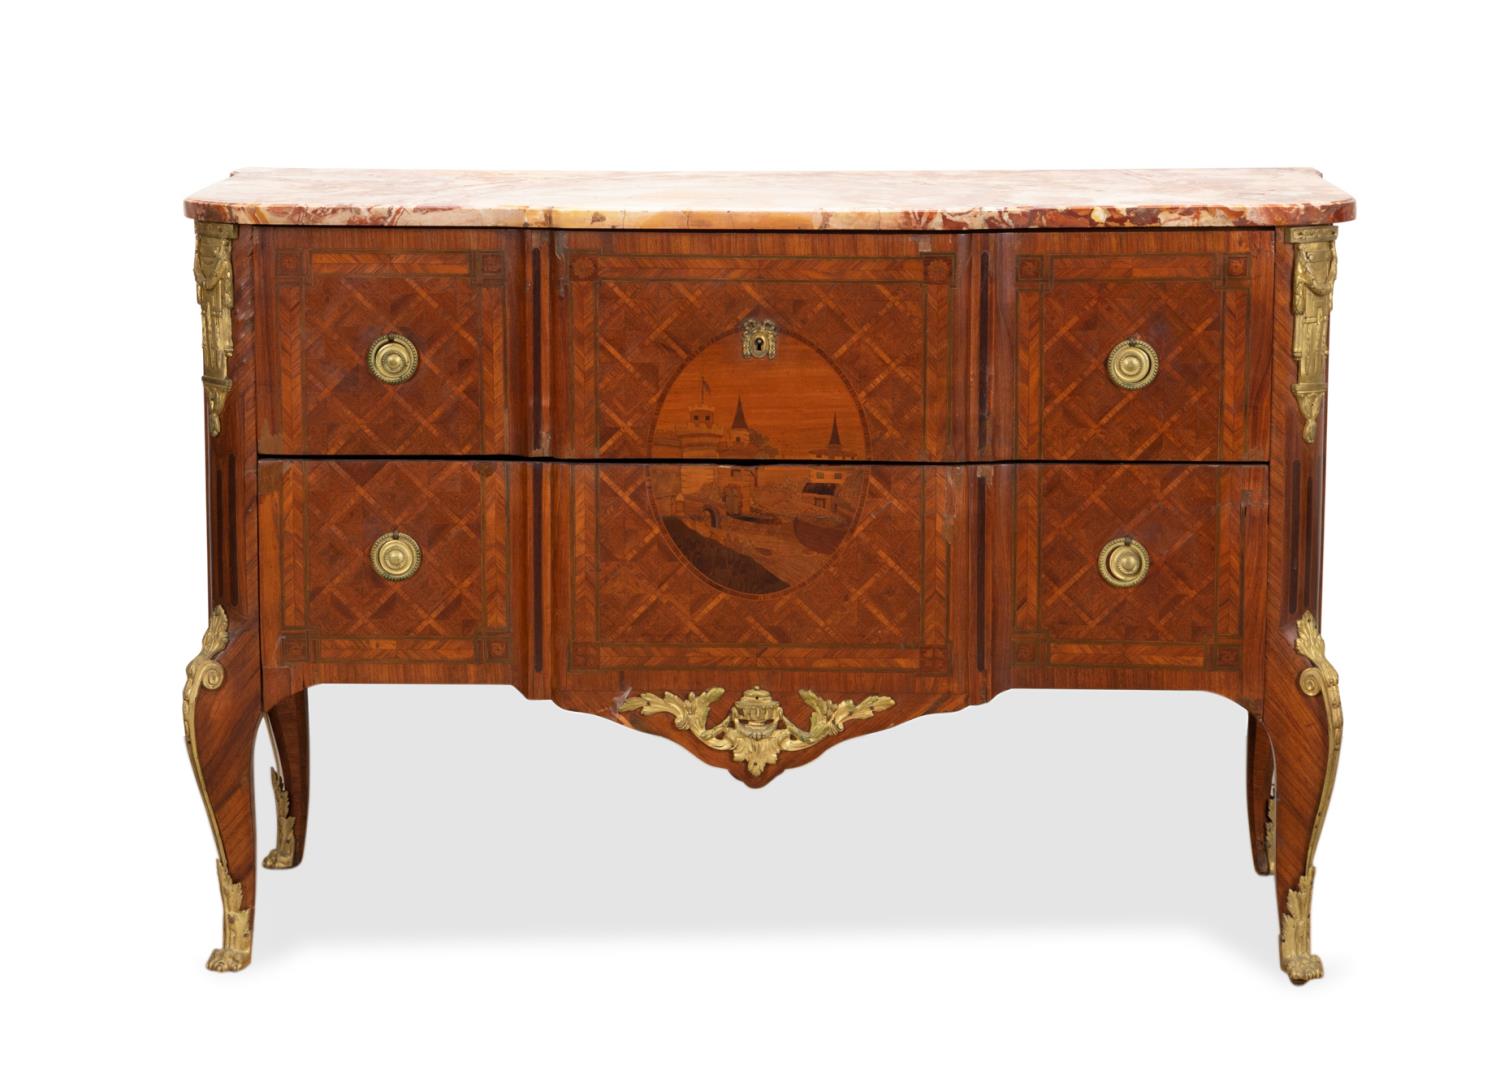 LOUIS XV STYLE MARBLE TOP MARQUETRY